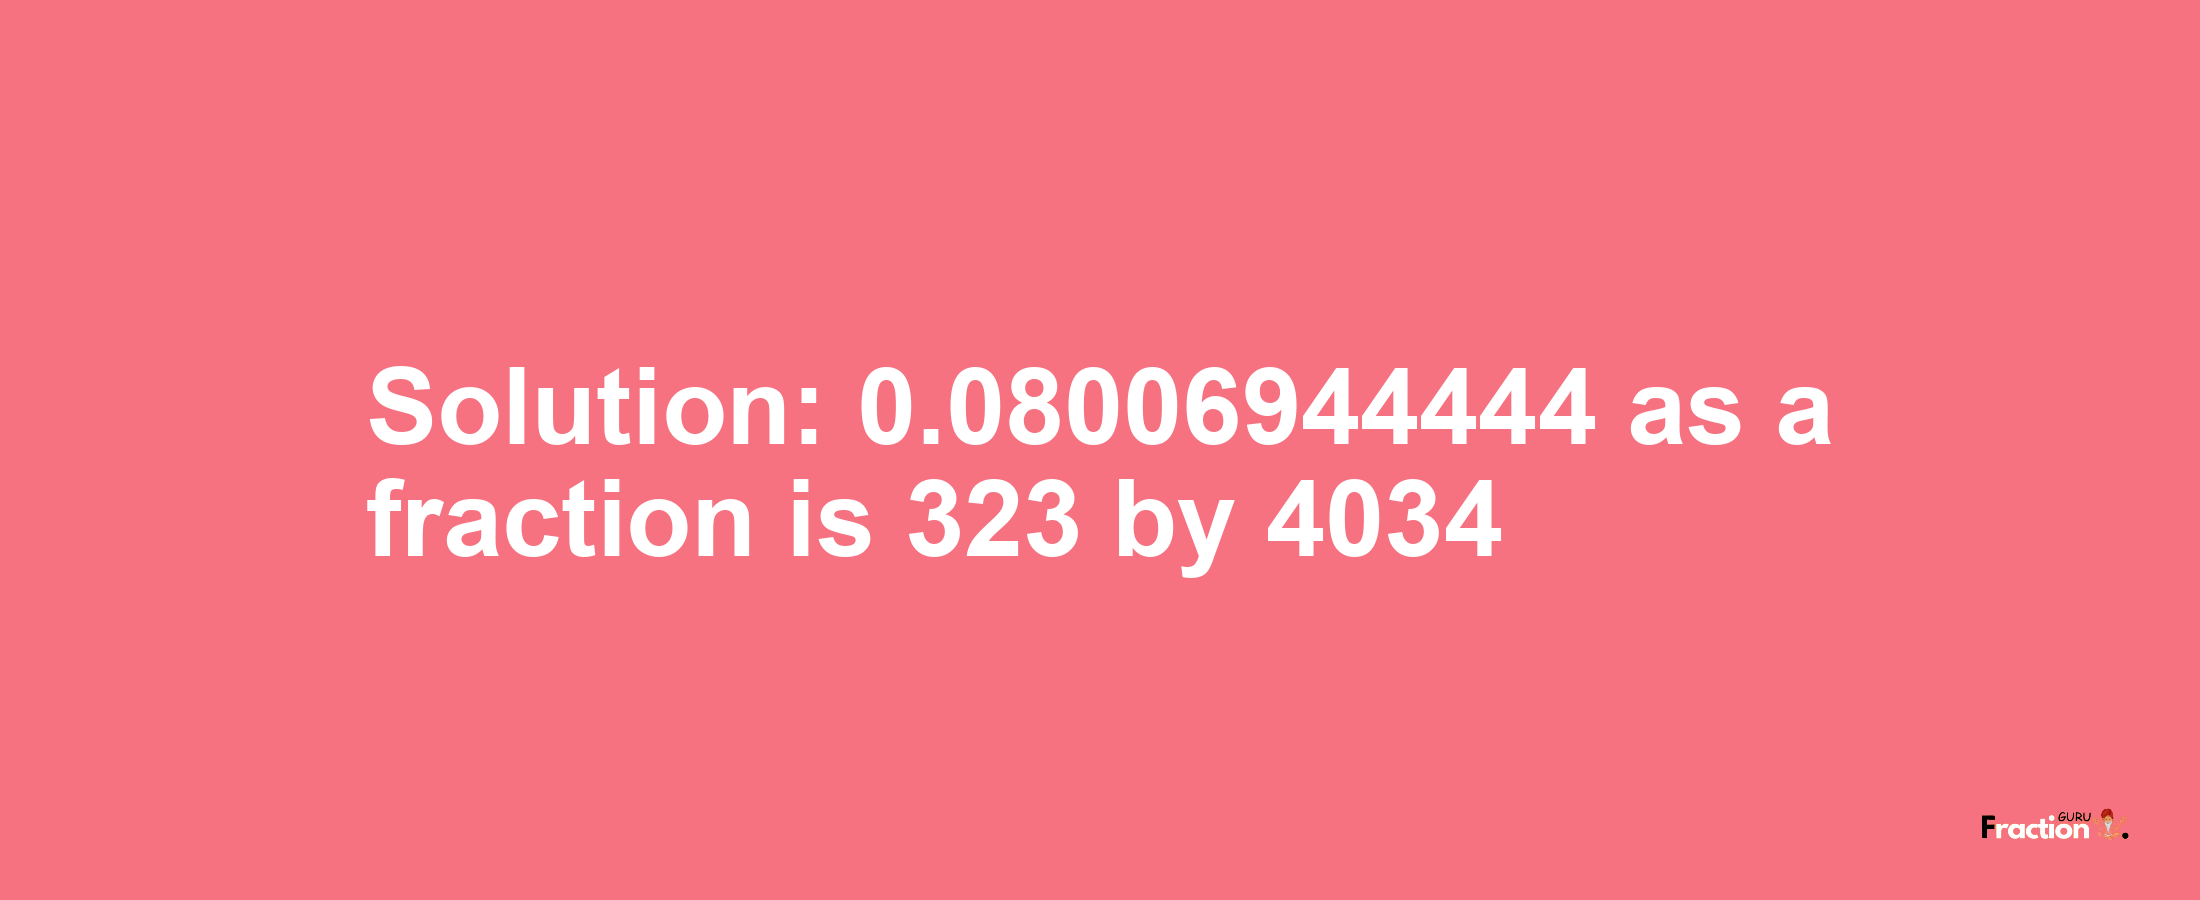 Solution:0.08006944444 as a fraction is 323/4034